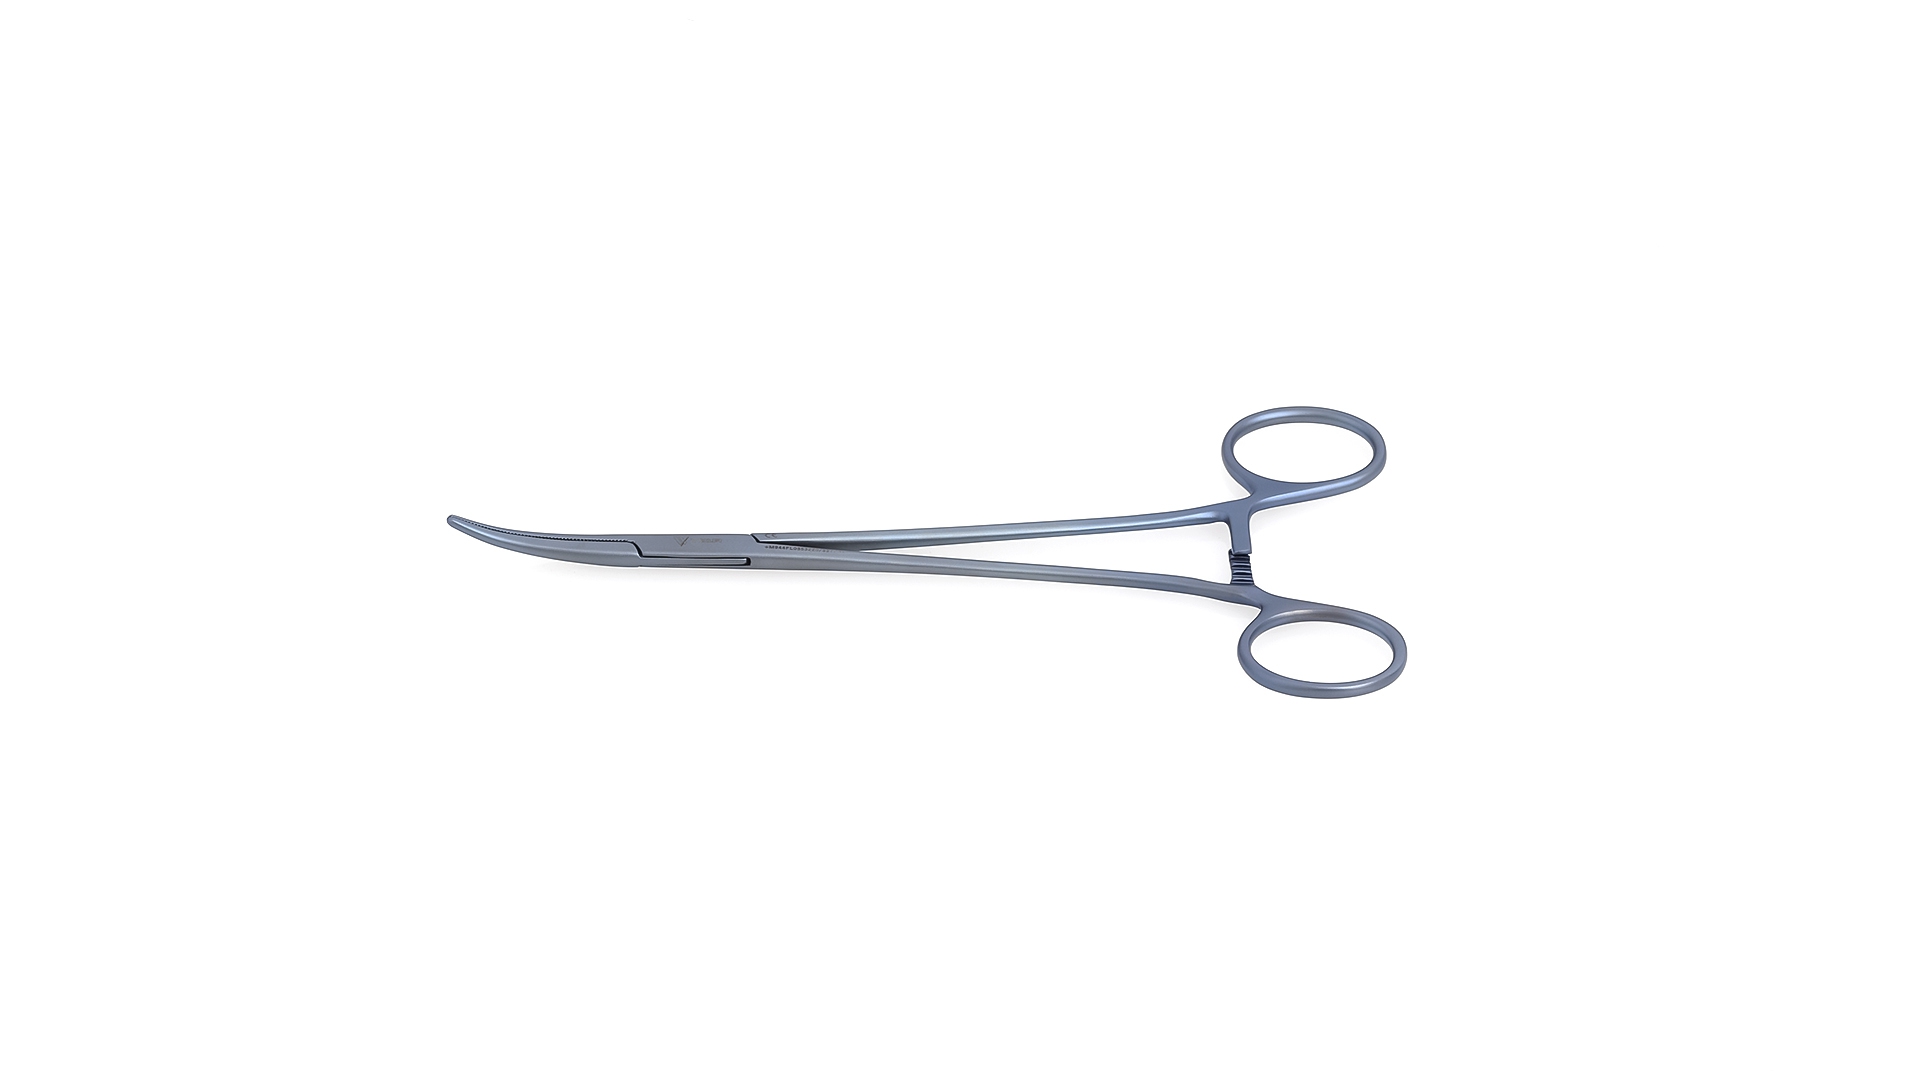 Bengolea Forceps - Curved serrated jaws